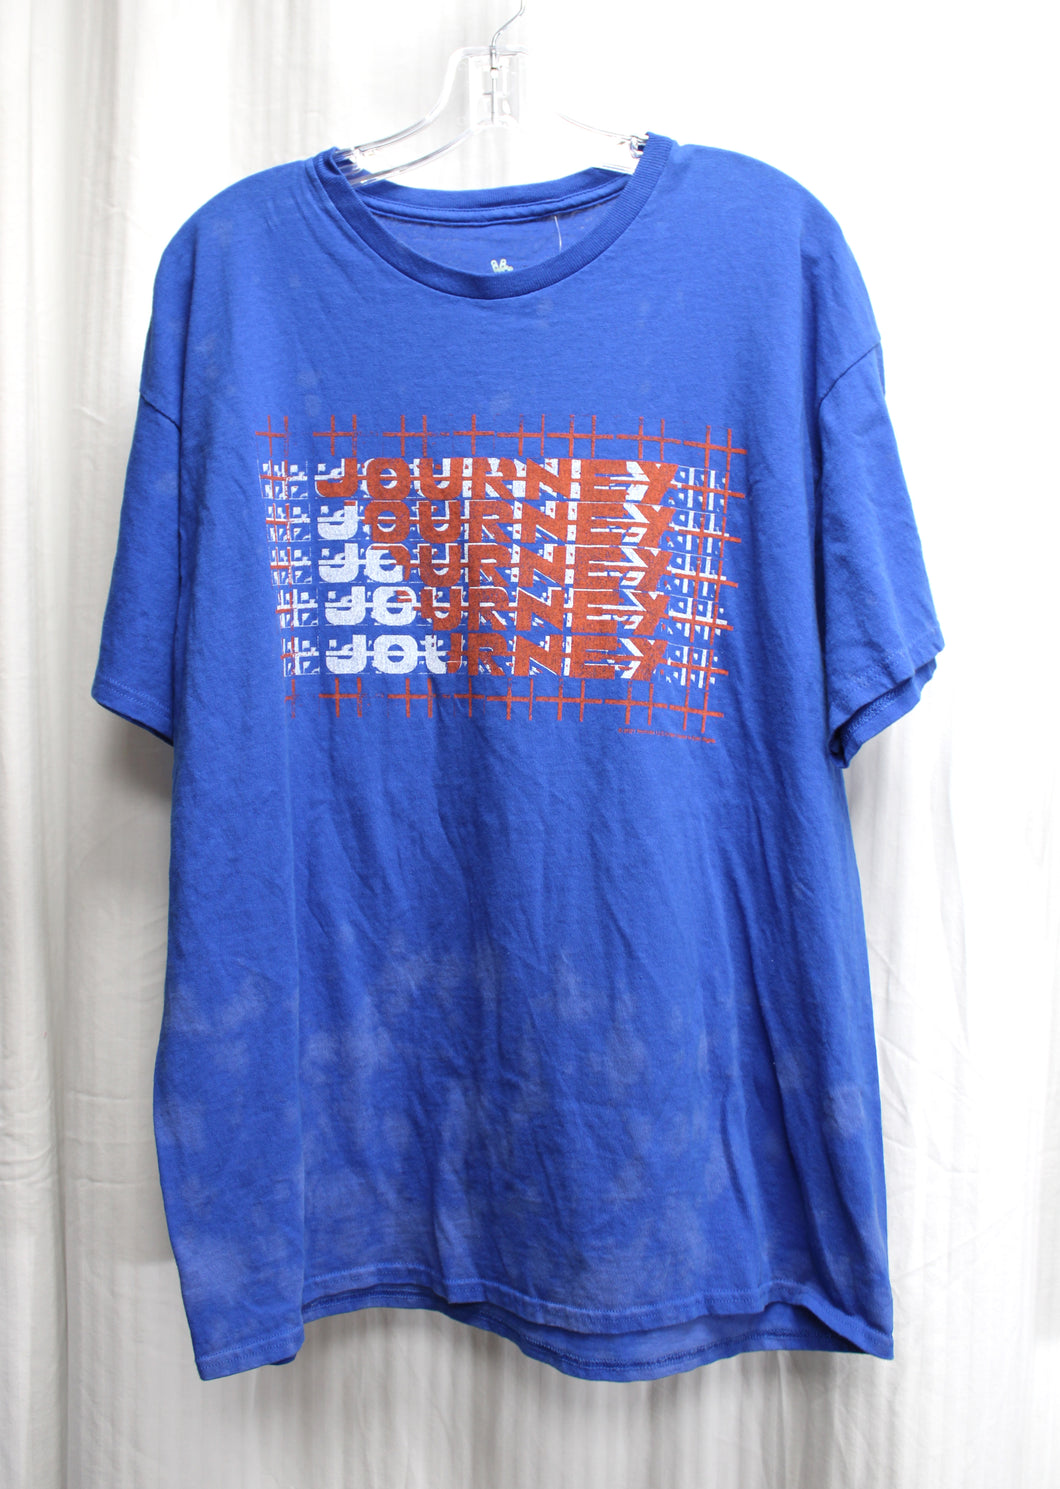 Journey - 2 Sided - Retro 1981 Don't Stop Belivin' - Blue T Shirt - Junk Food Clothing Los Angeles -(Choose Size) w/ TAGS